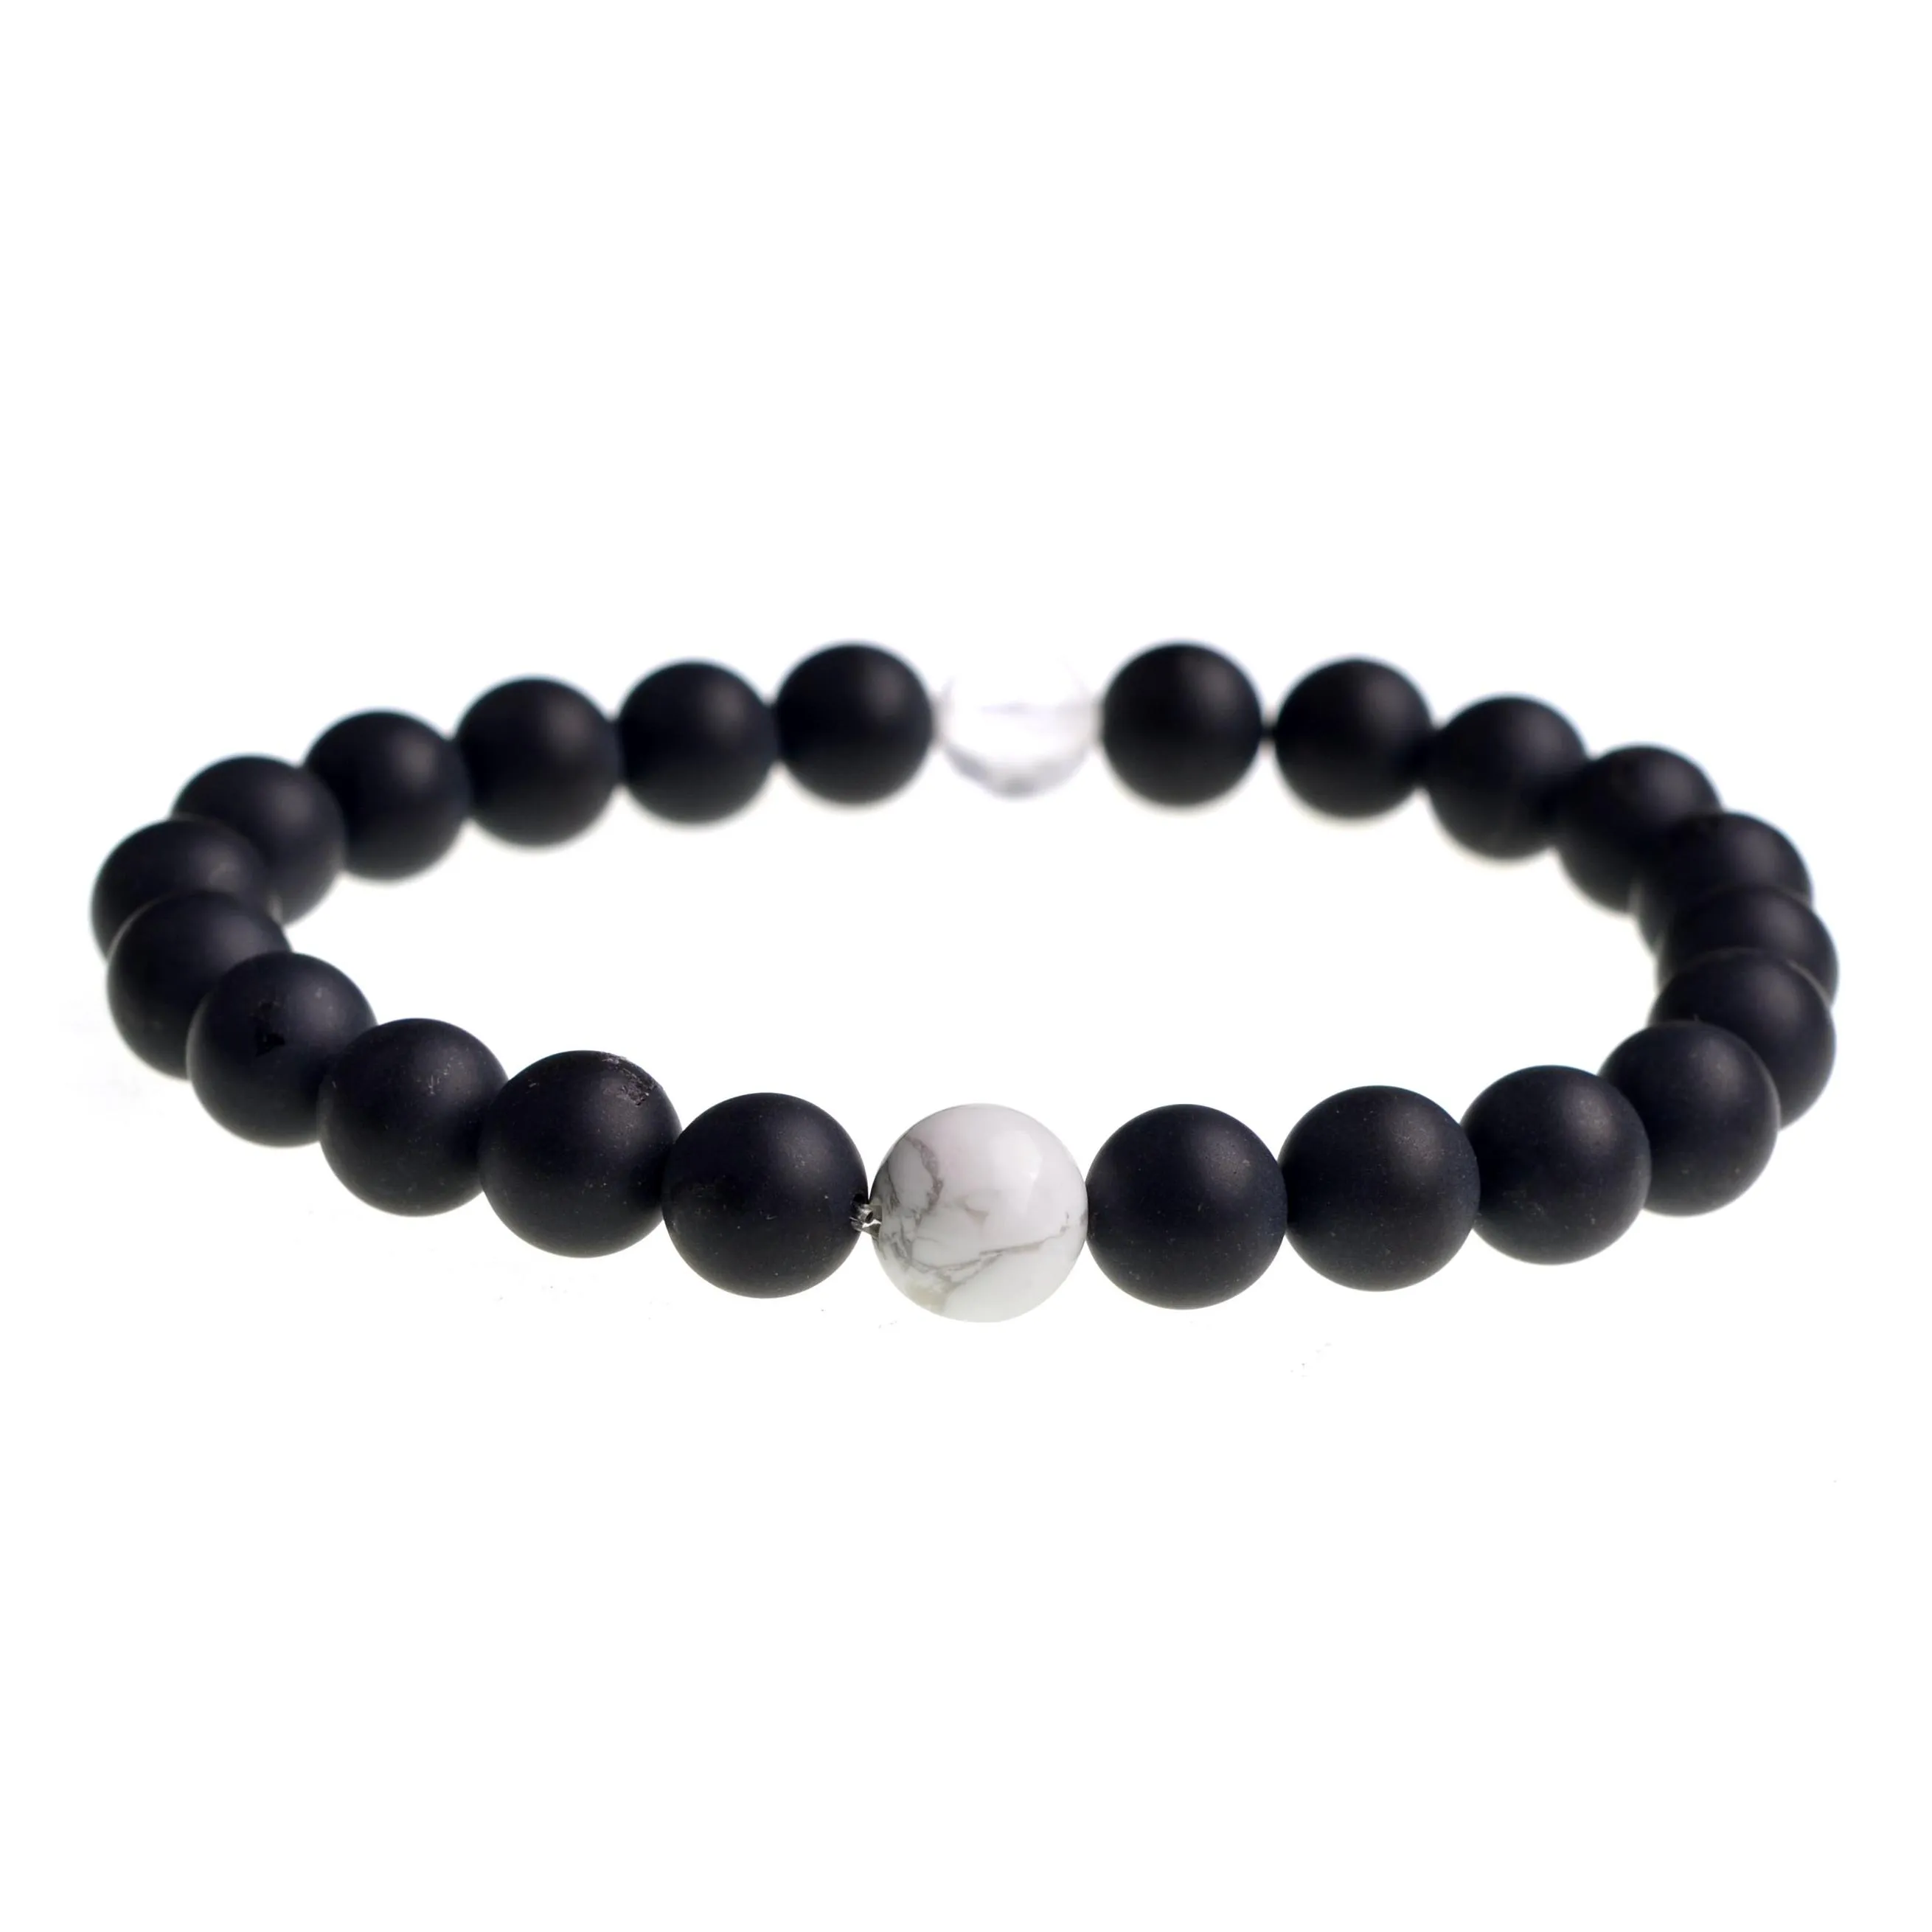 Natural stone bracelet for men and women with any two beads fashion popular wrist jewelry